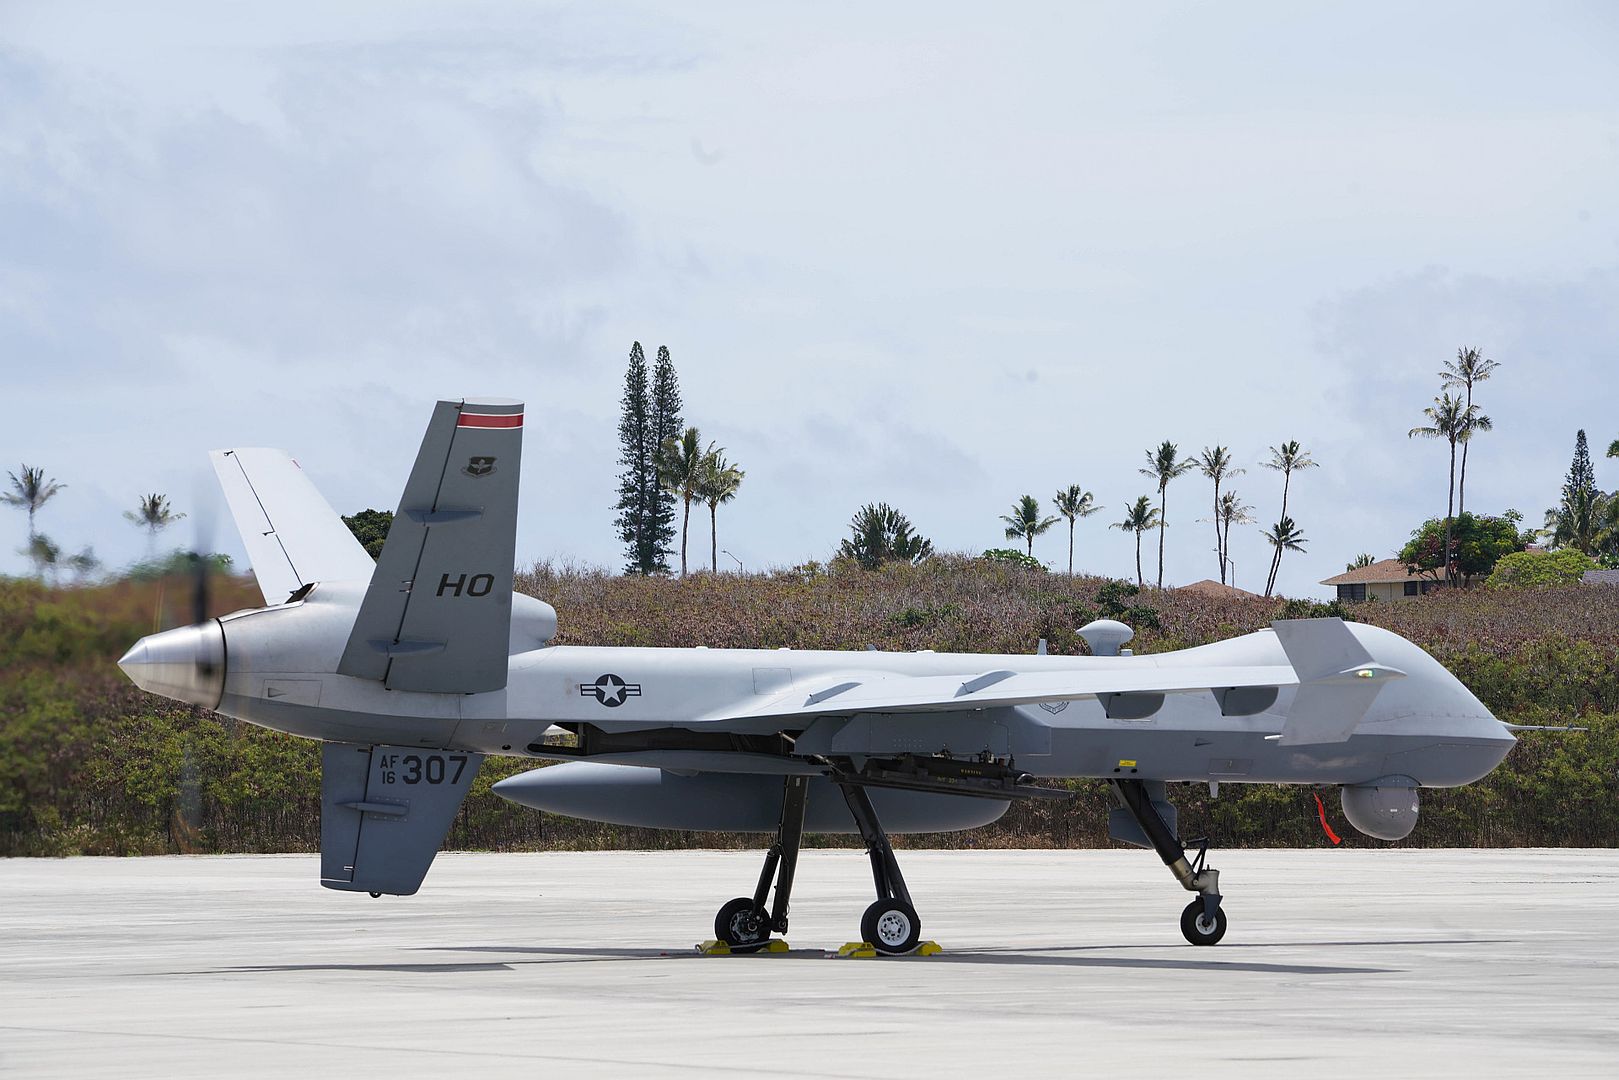 9 Reaper Assigned To The 49th Wing Lands At Marine Corps Air Station Kaneohe Bay Hawaii During Rim Of The Pacific